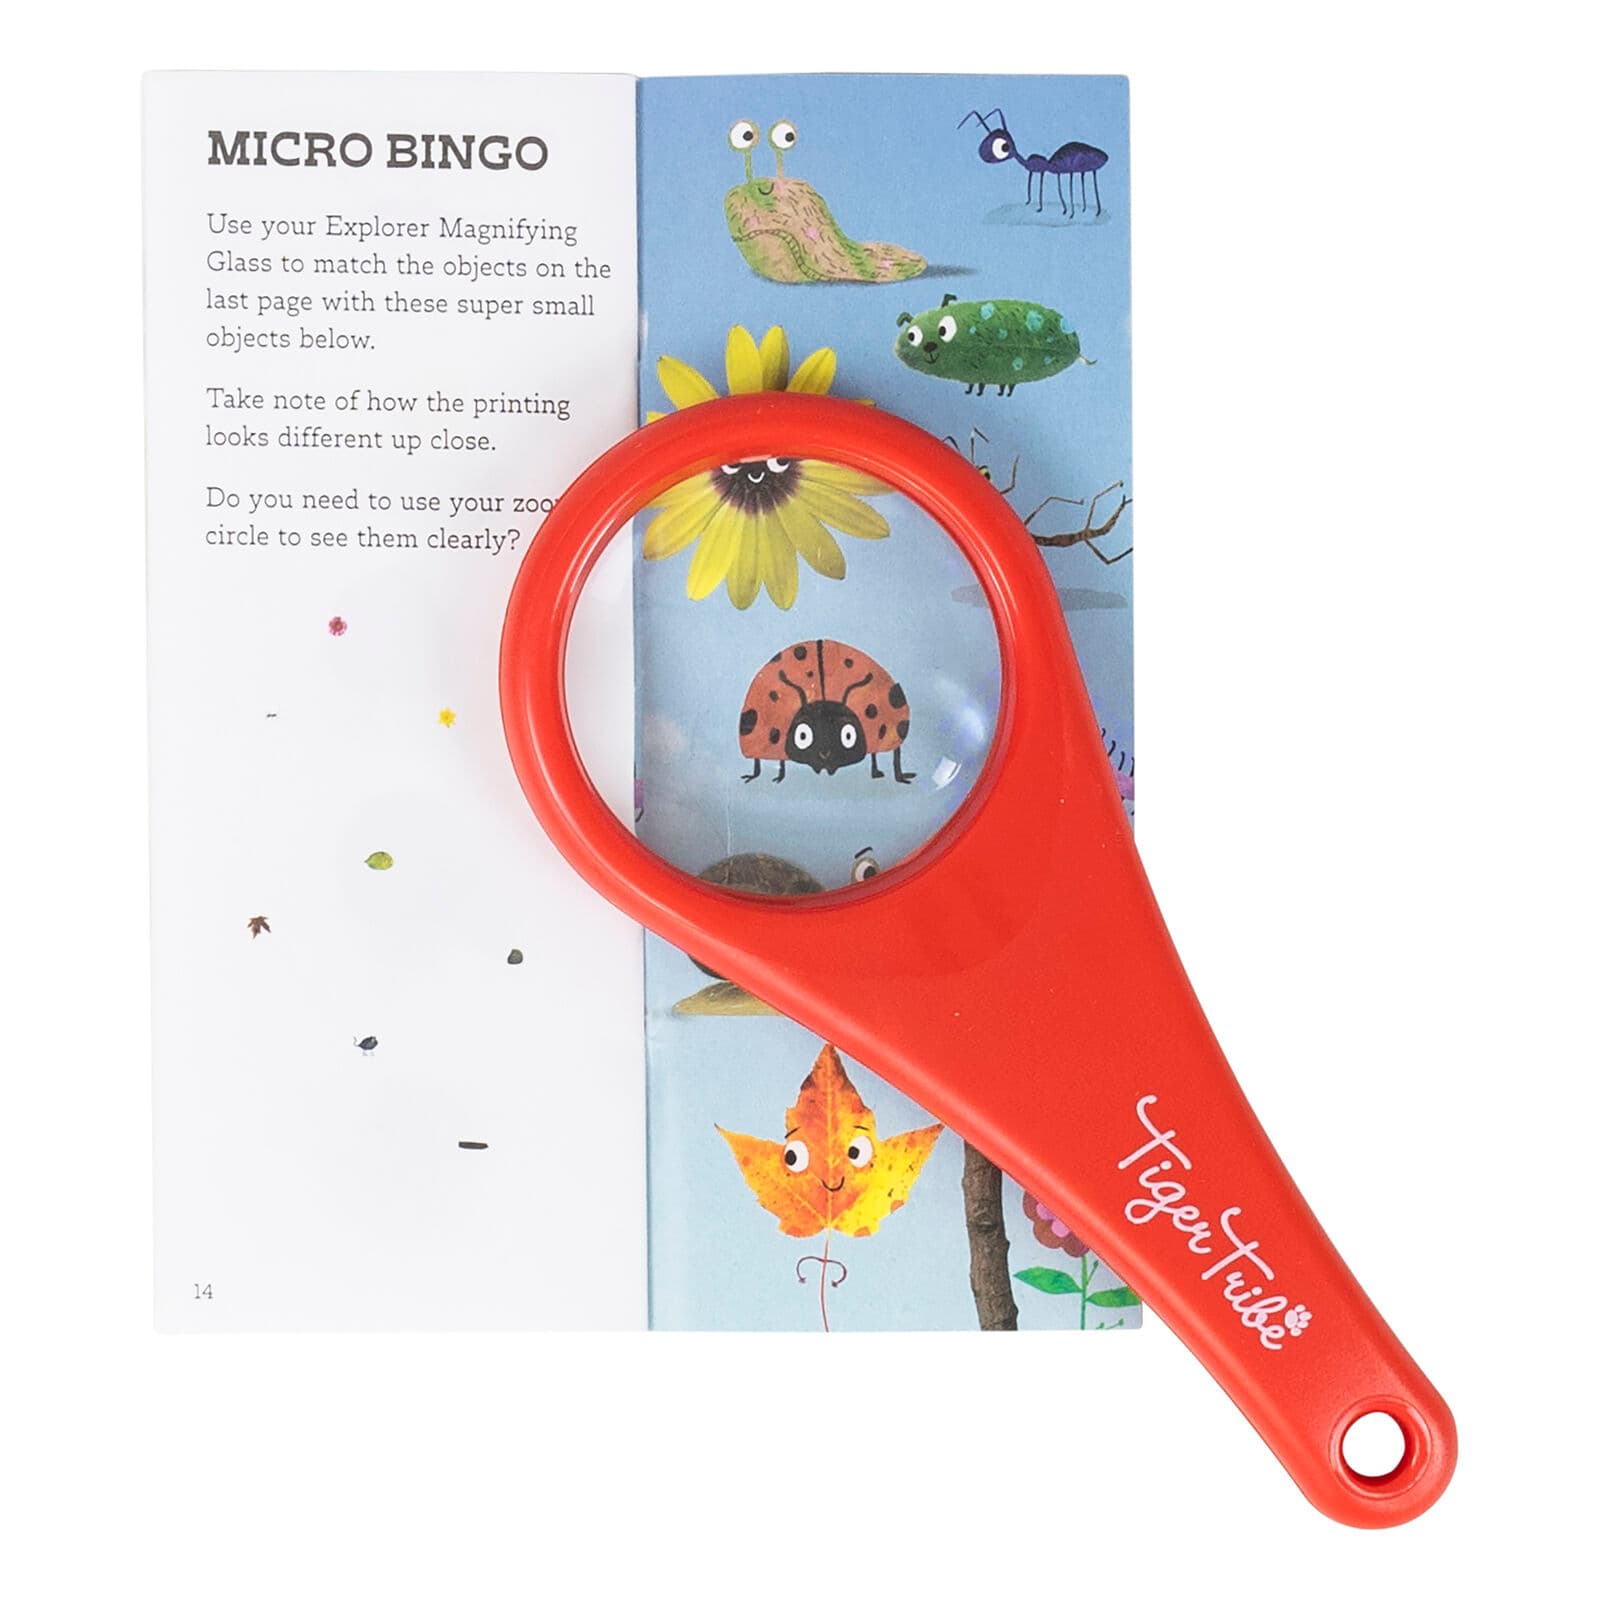 Tiger Tribe Explorer Magnifying Glass and instructions